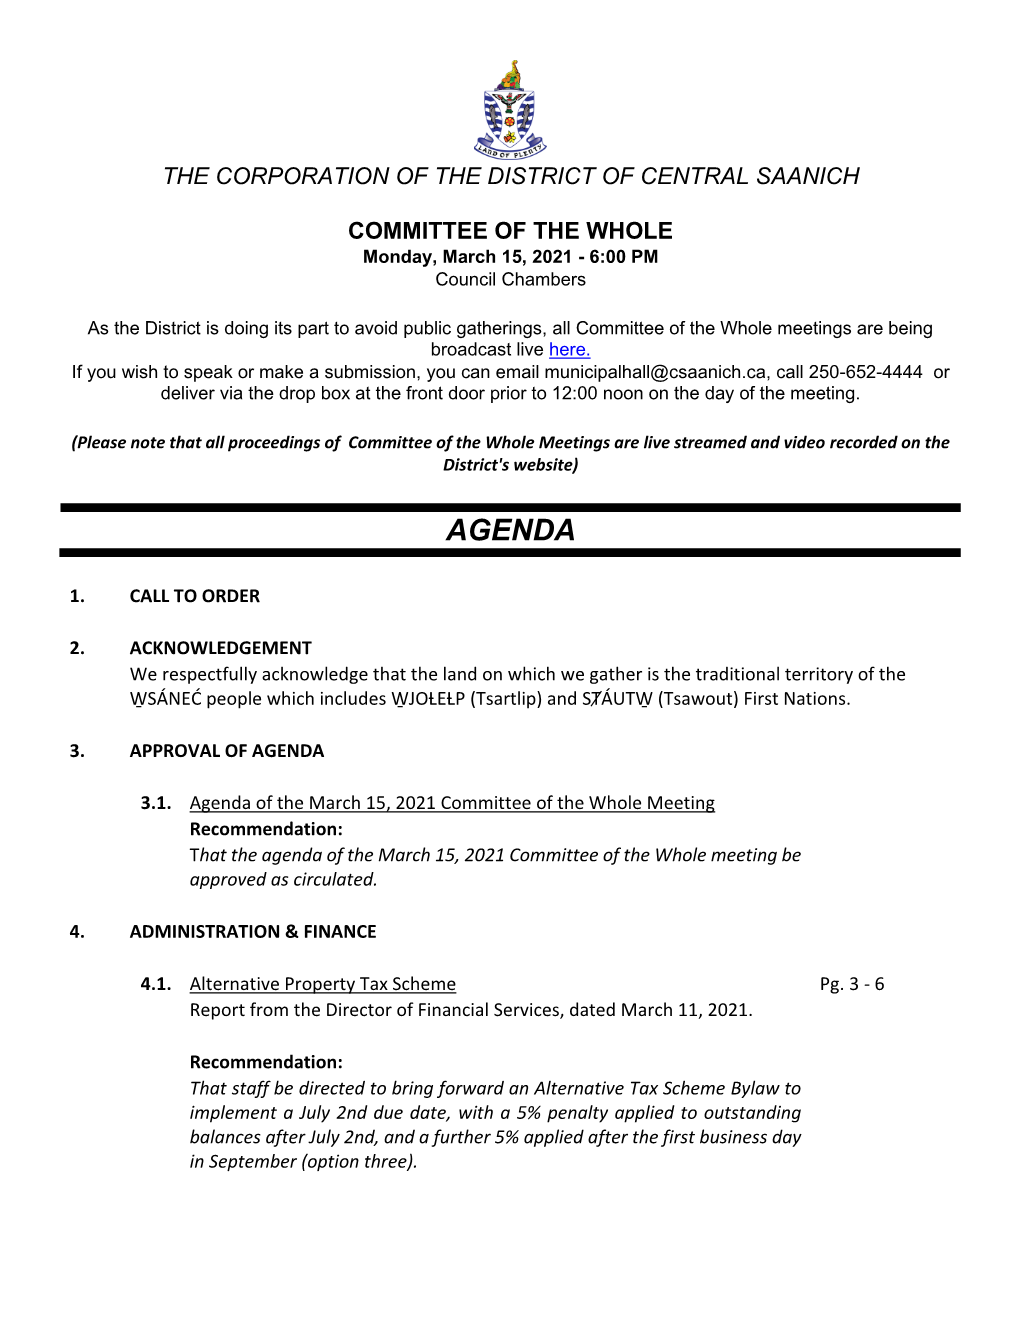 COMMITTEE of the WHOLE Monday, March 15, 2021 - 6:00 PM Council Chambers